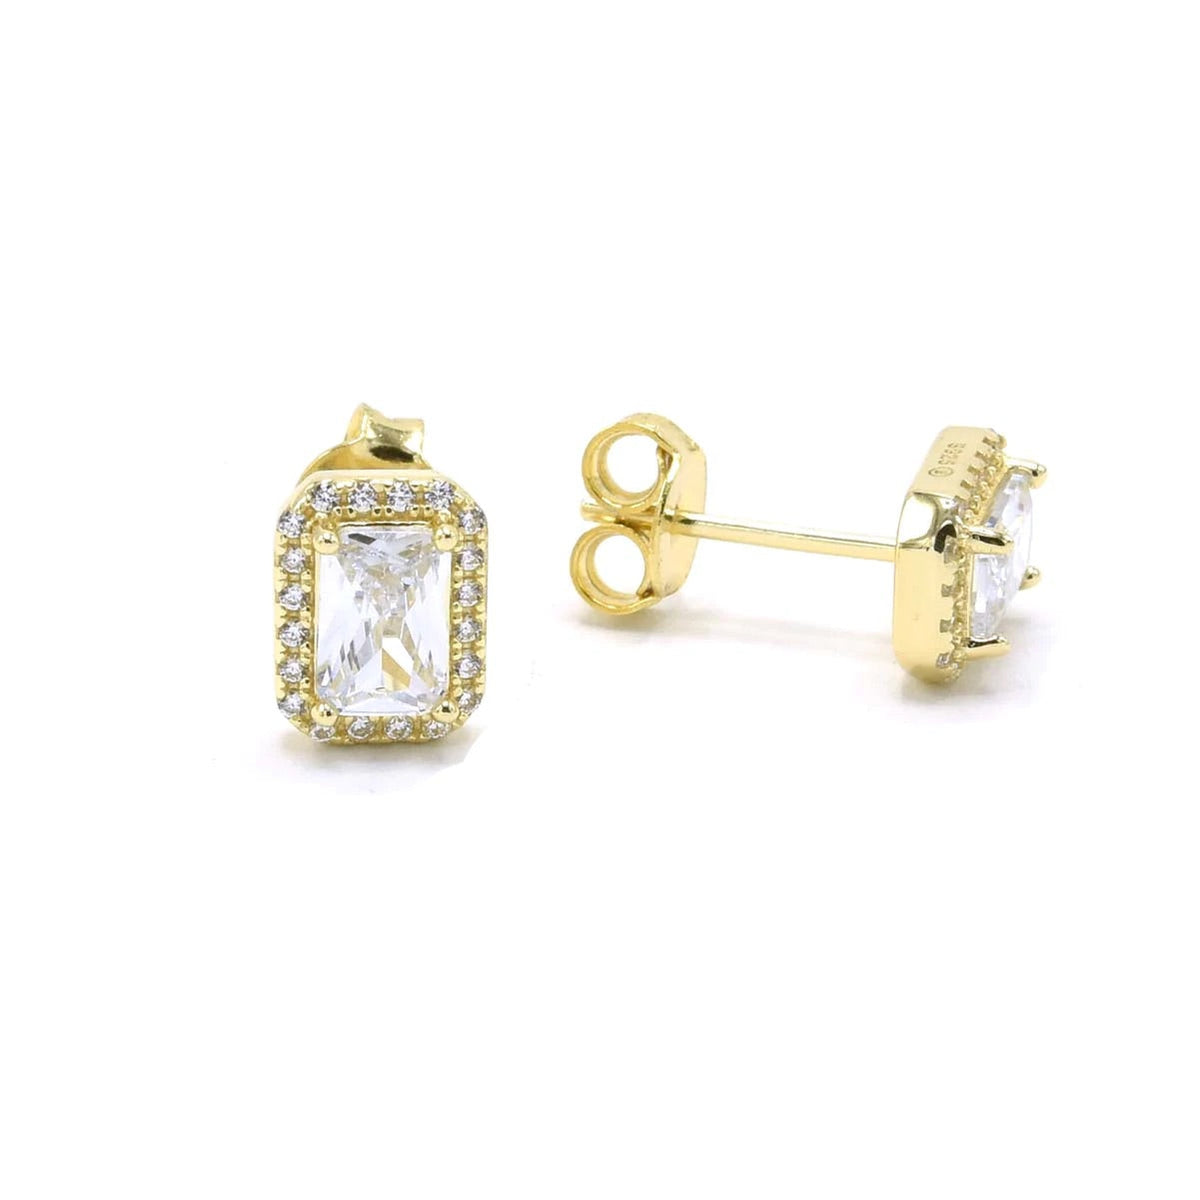 Rectangle diamond stud CZ earrings water resistant for sensitive ears, gold rectangle stud diamond cz earrings. Popular earrings, cute earrings studs  sterling silver 